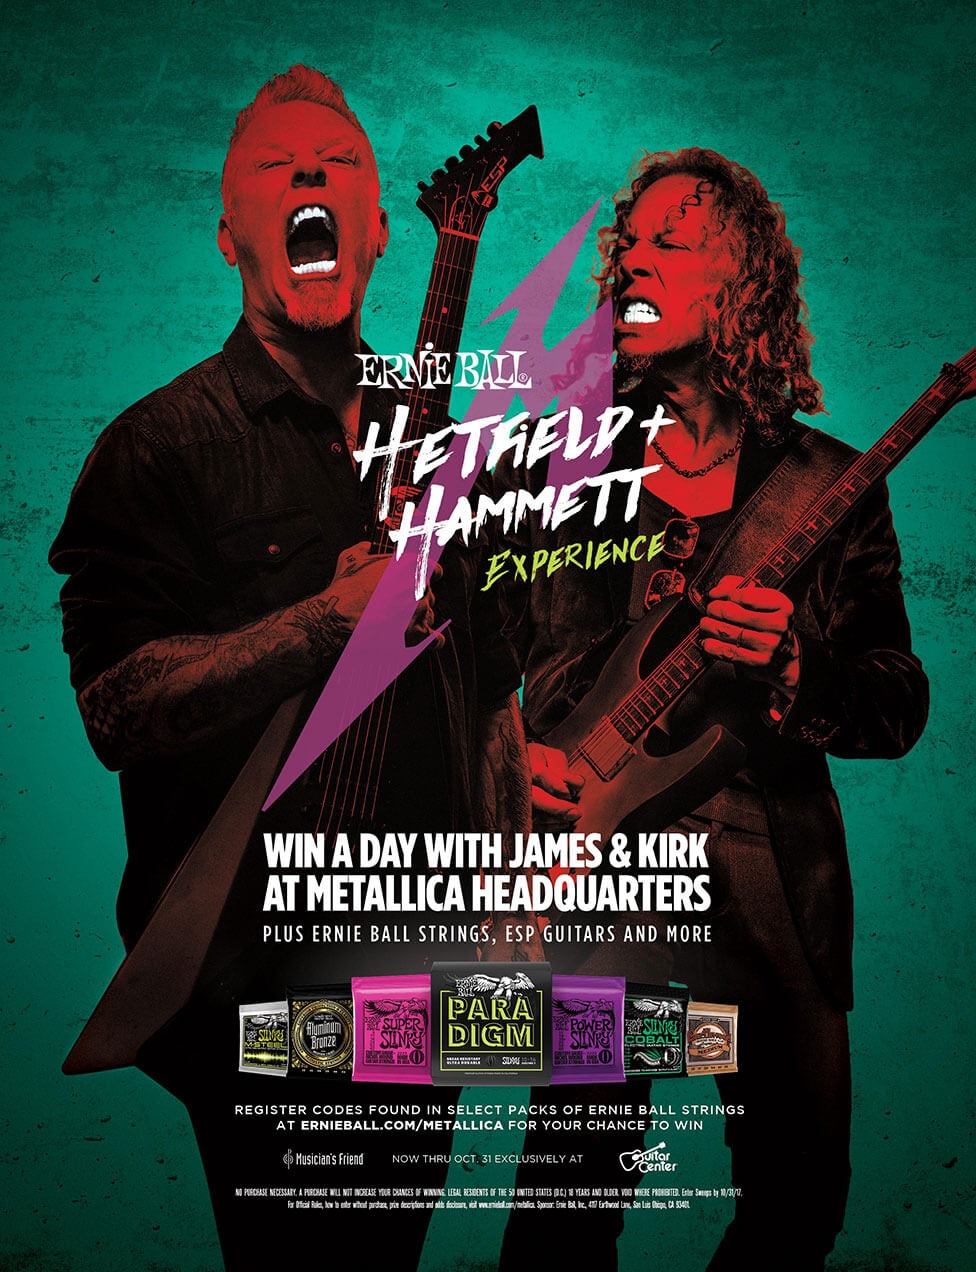 Ernie Ball Hetfield plus Hammett Experience win a day with James and Kirk at Metalica Headquarters